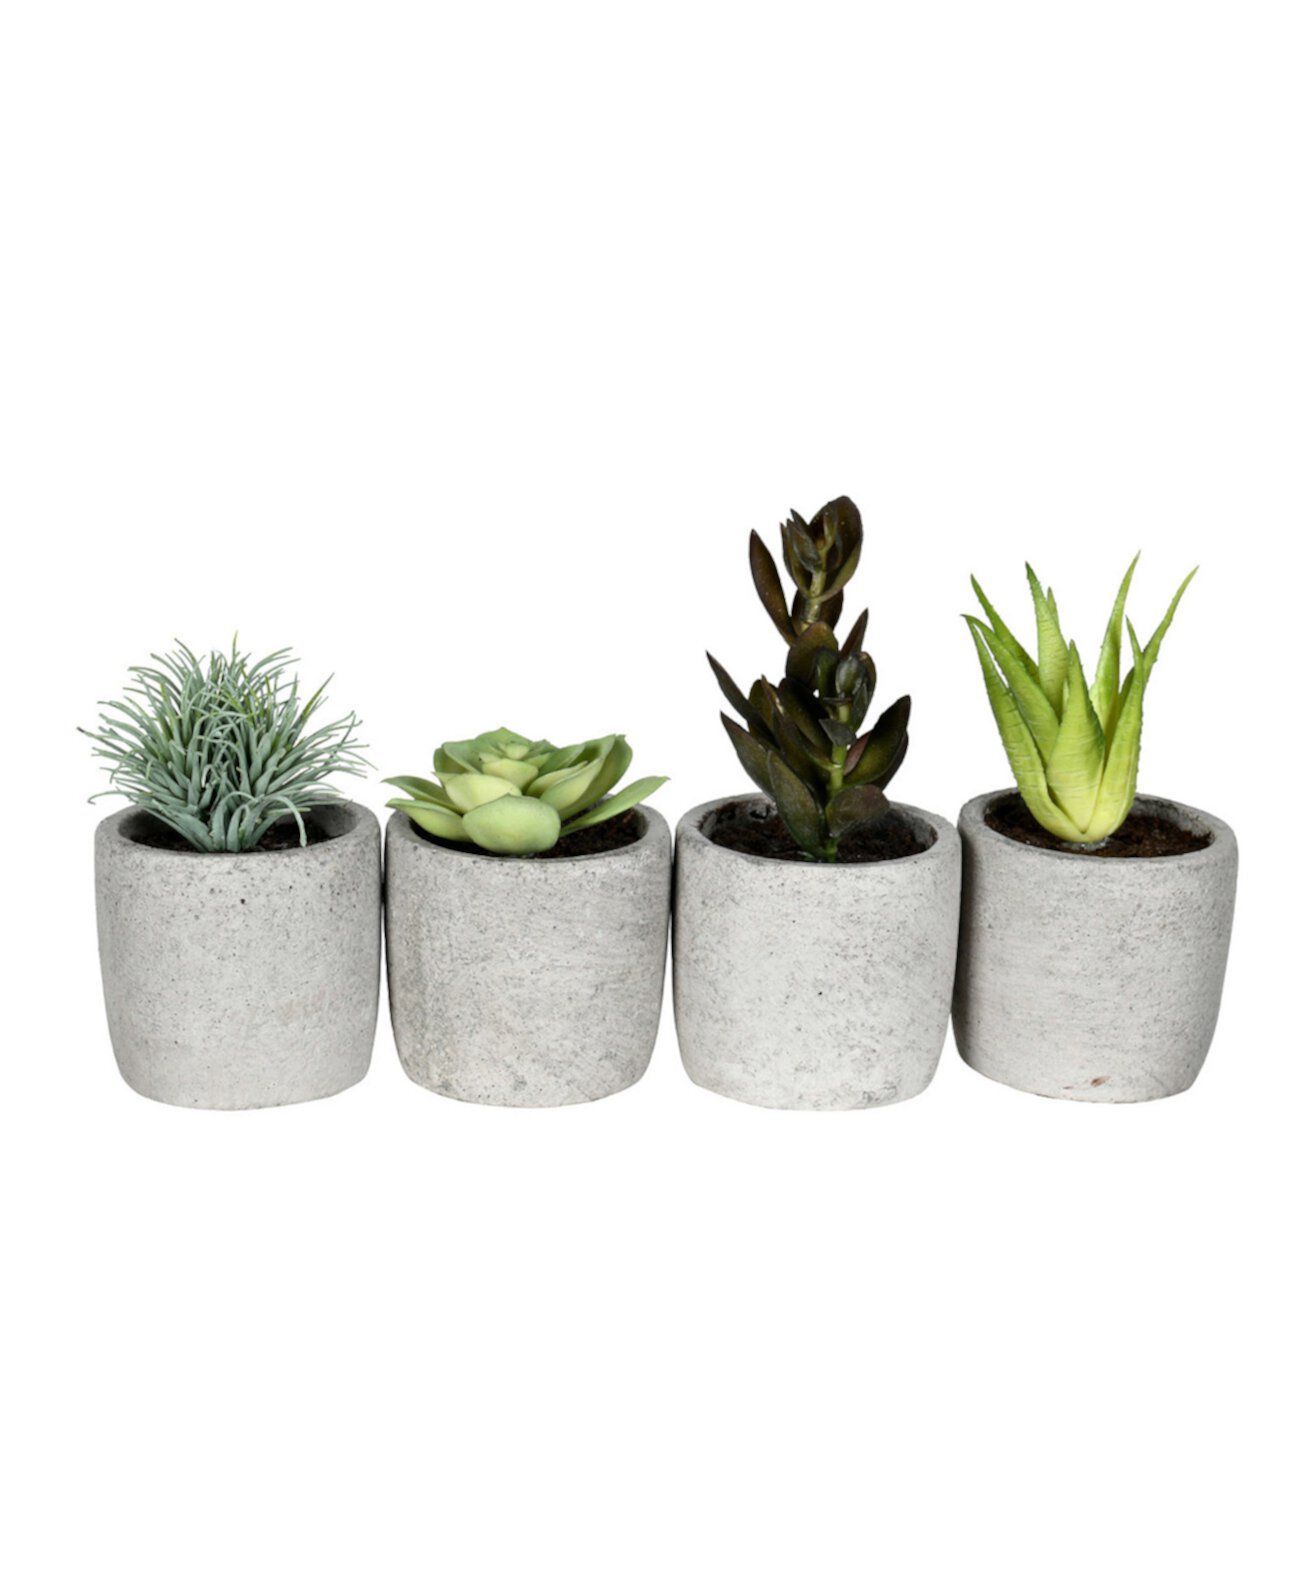 6" Artificial Assorted Potted Succulents, Set of 4. Vickerman